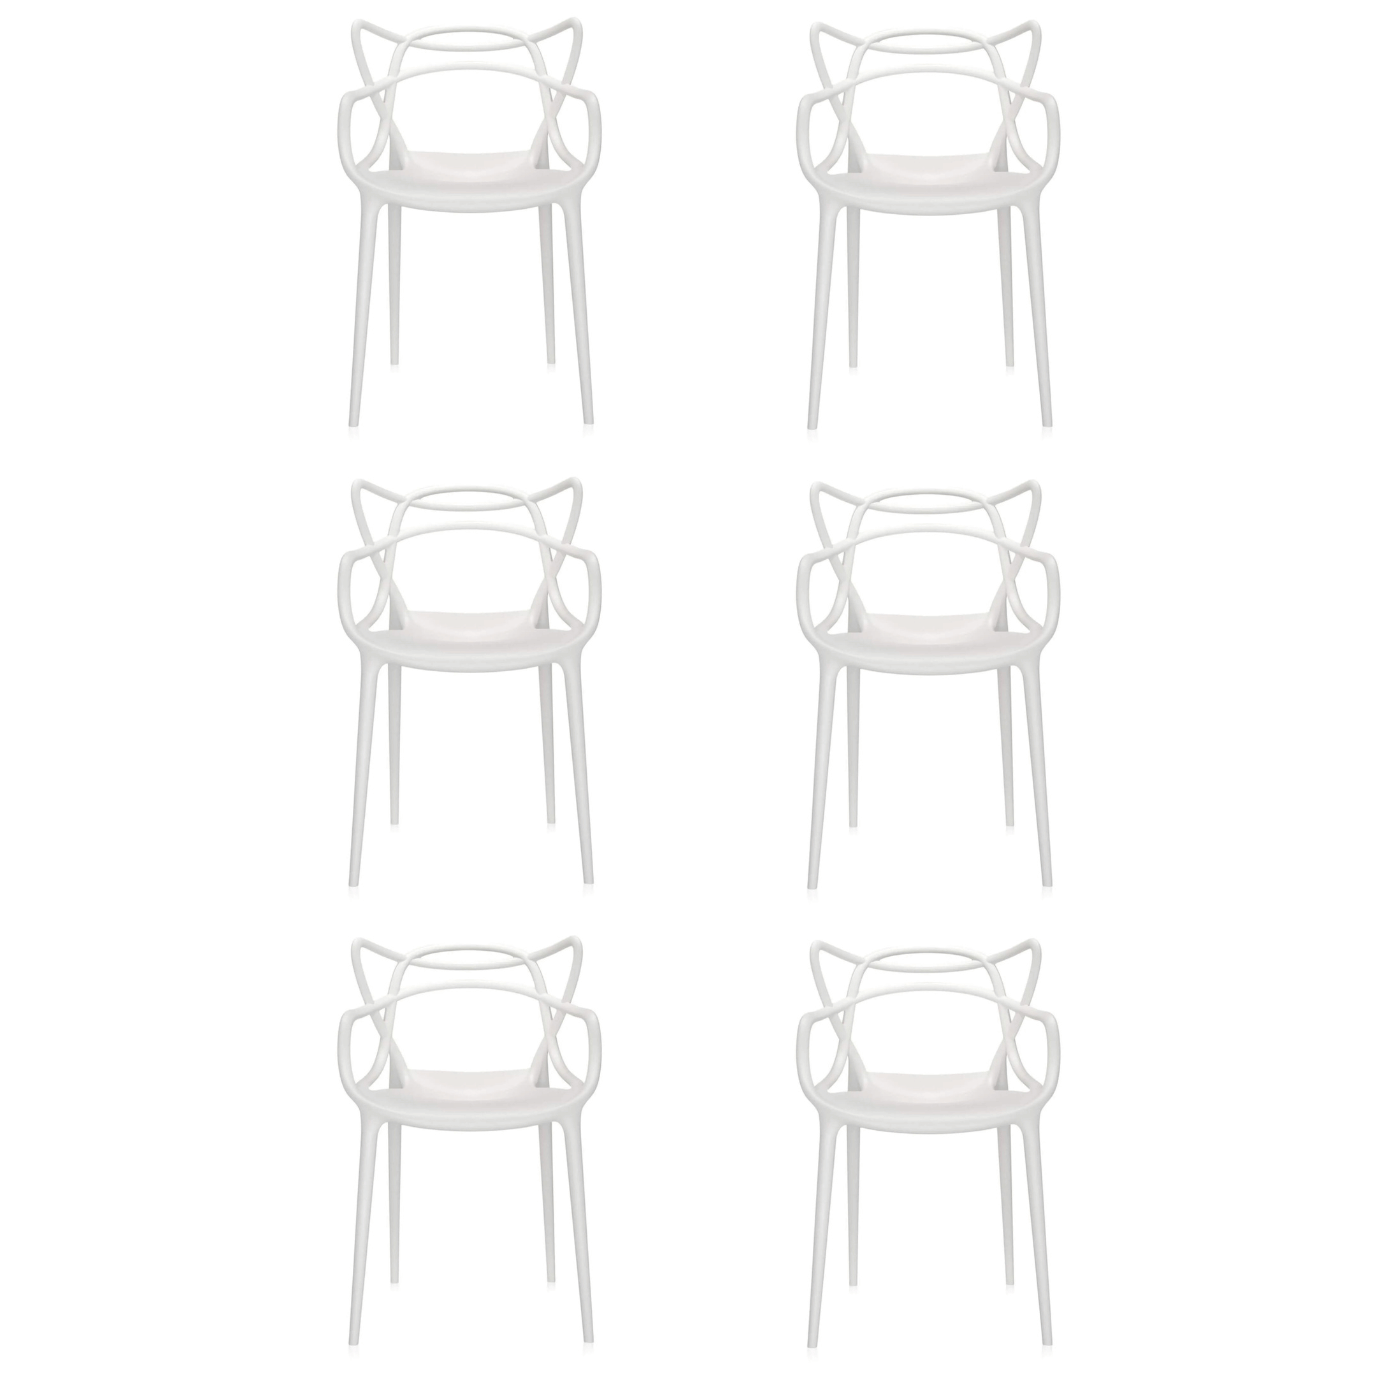 Kartell Masters Dining Chair Bundle Set Of 6 Chairs White Designer Furniture From Holloways Of Ludlow